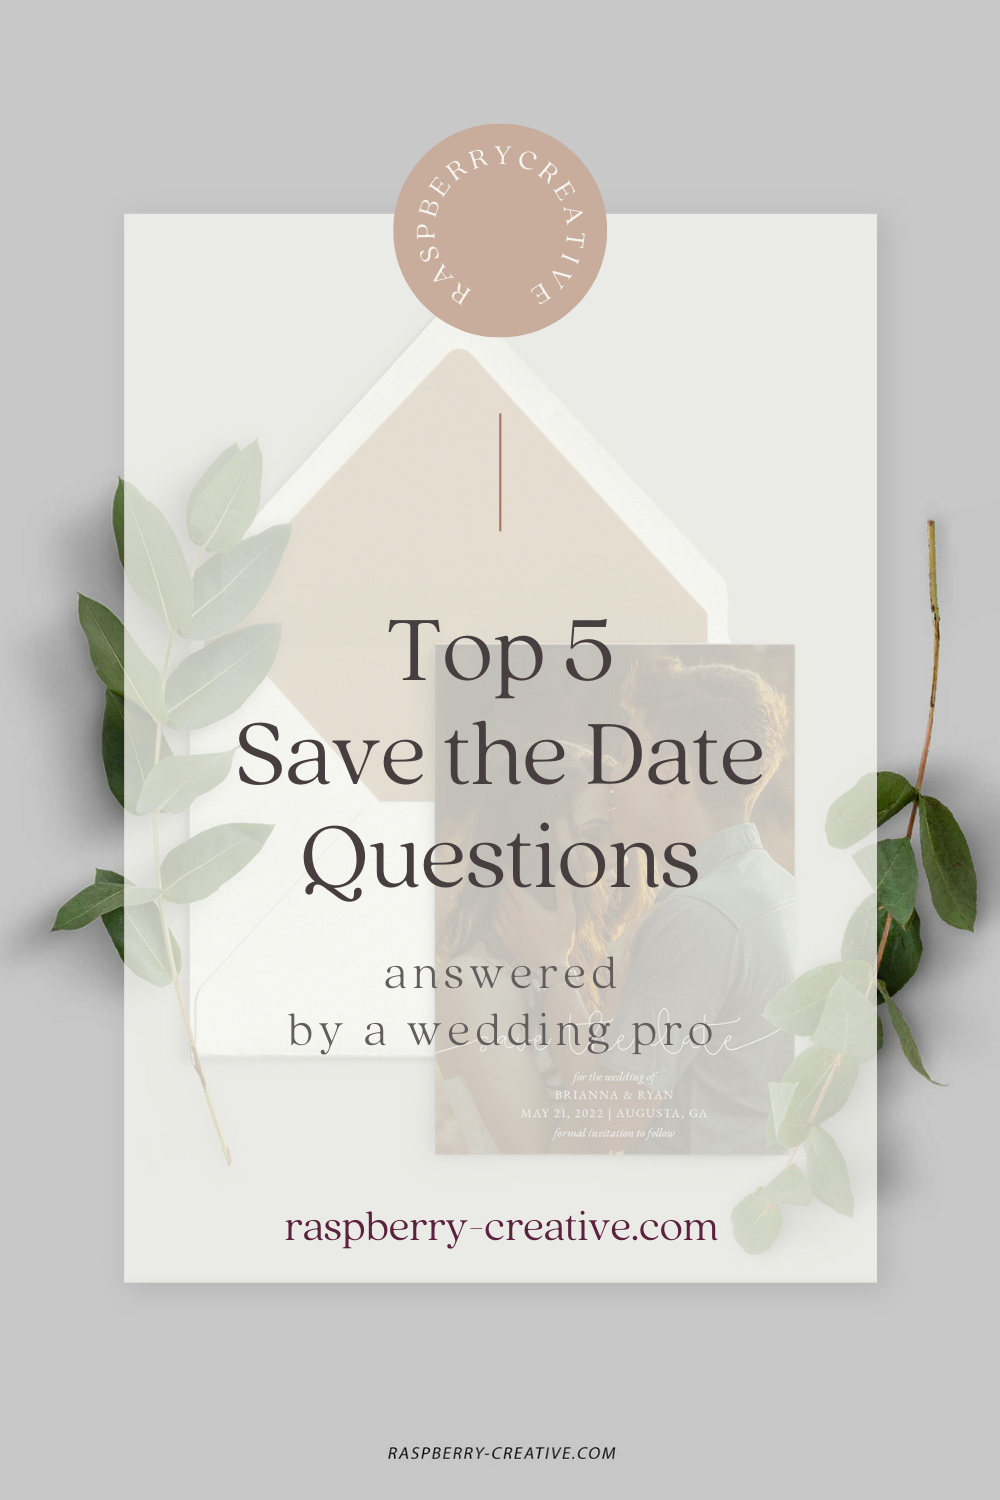 10312022-top-5-save-the-date-questions-answered-1